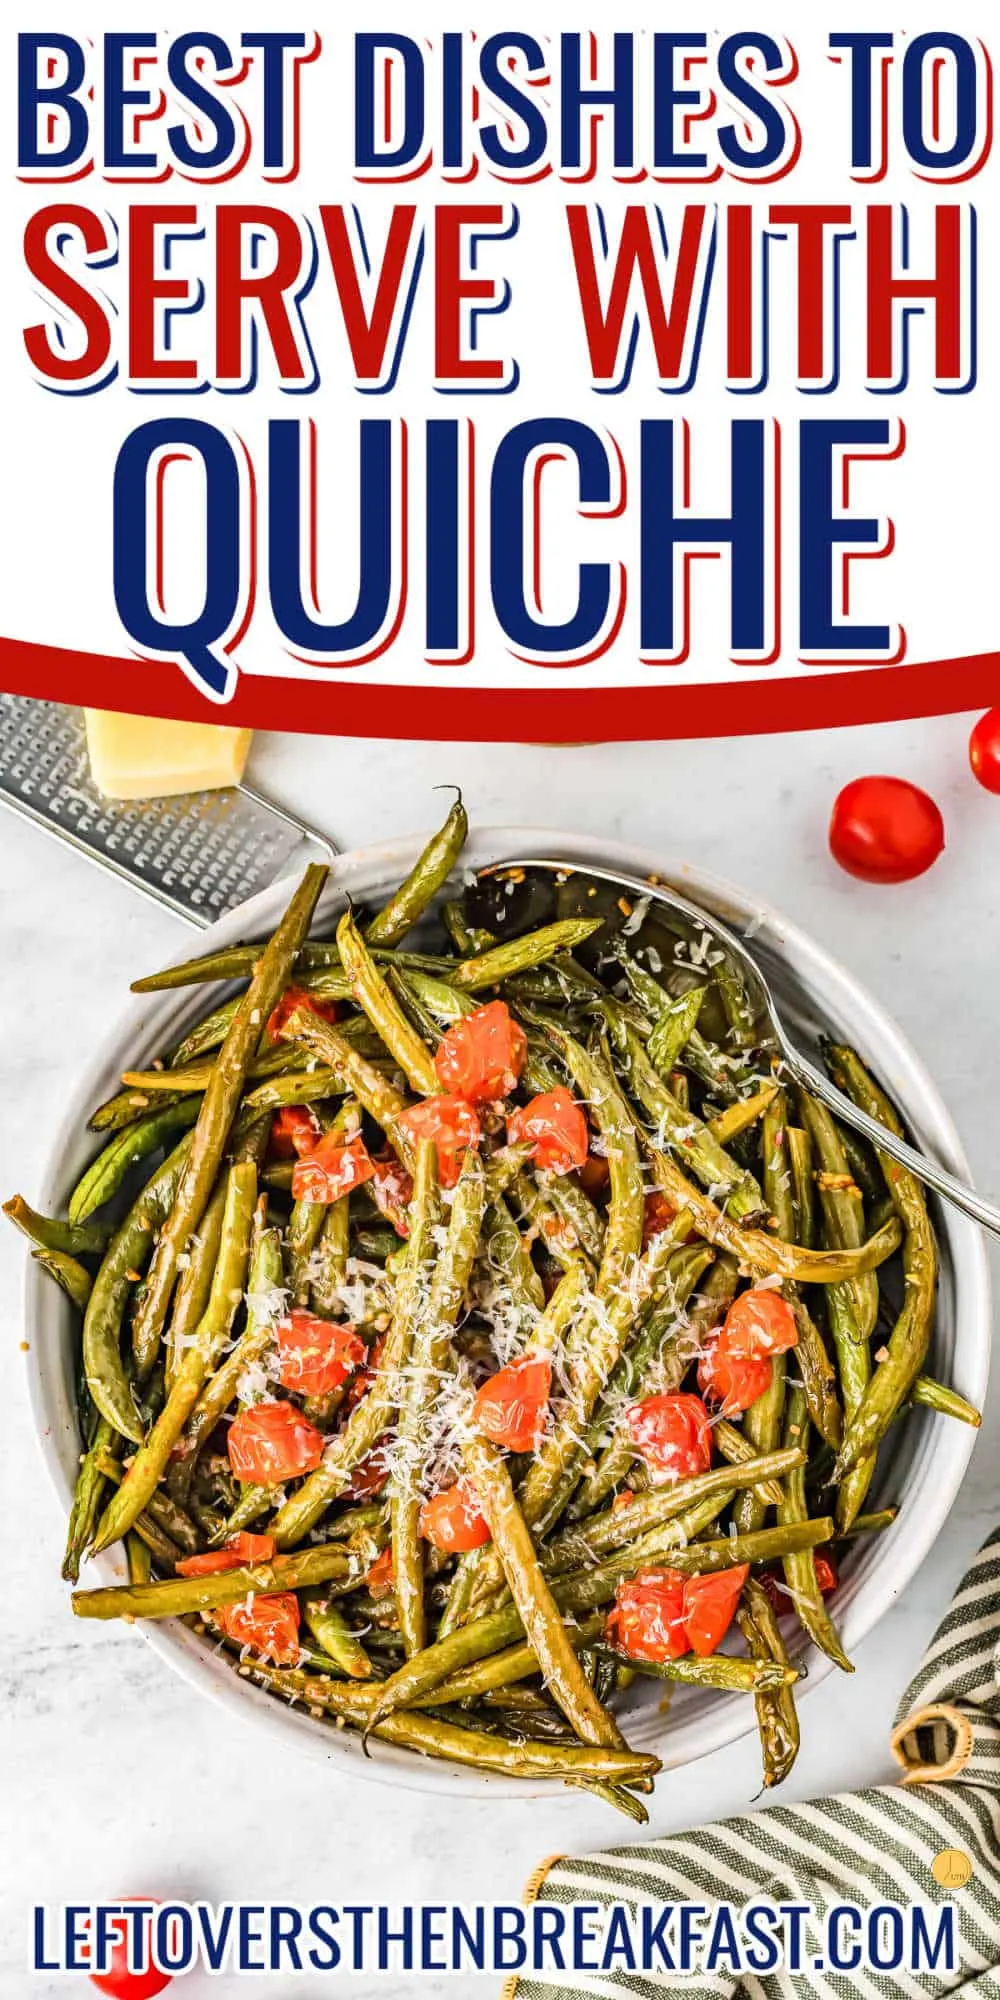 bowl of beans with text "best dishes to serve with quiche